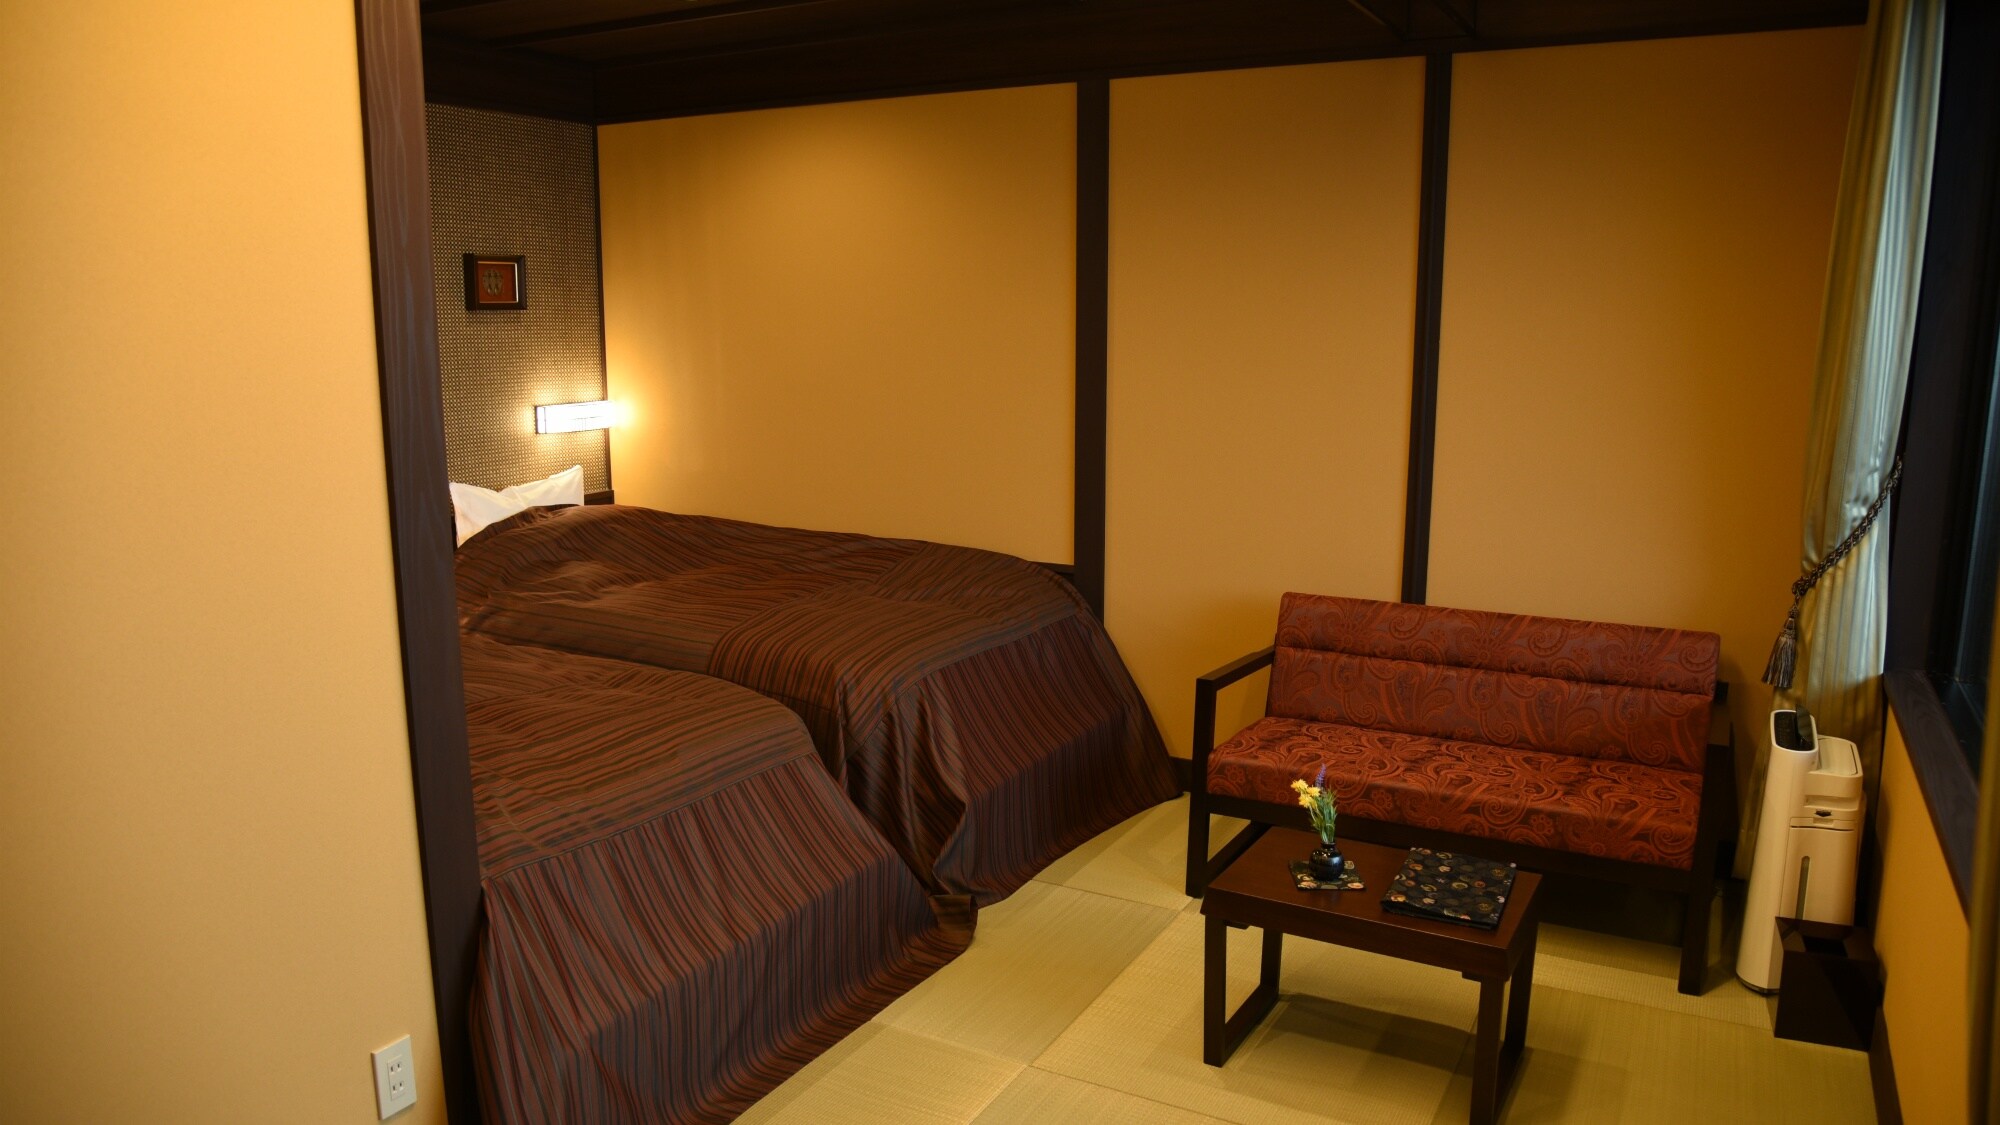 Oichi: The rooms are tatami-matted so that you can feel at home and relax.